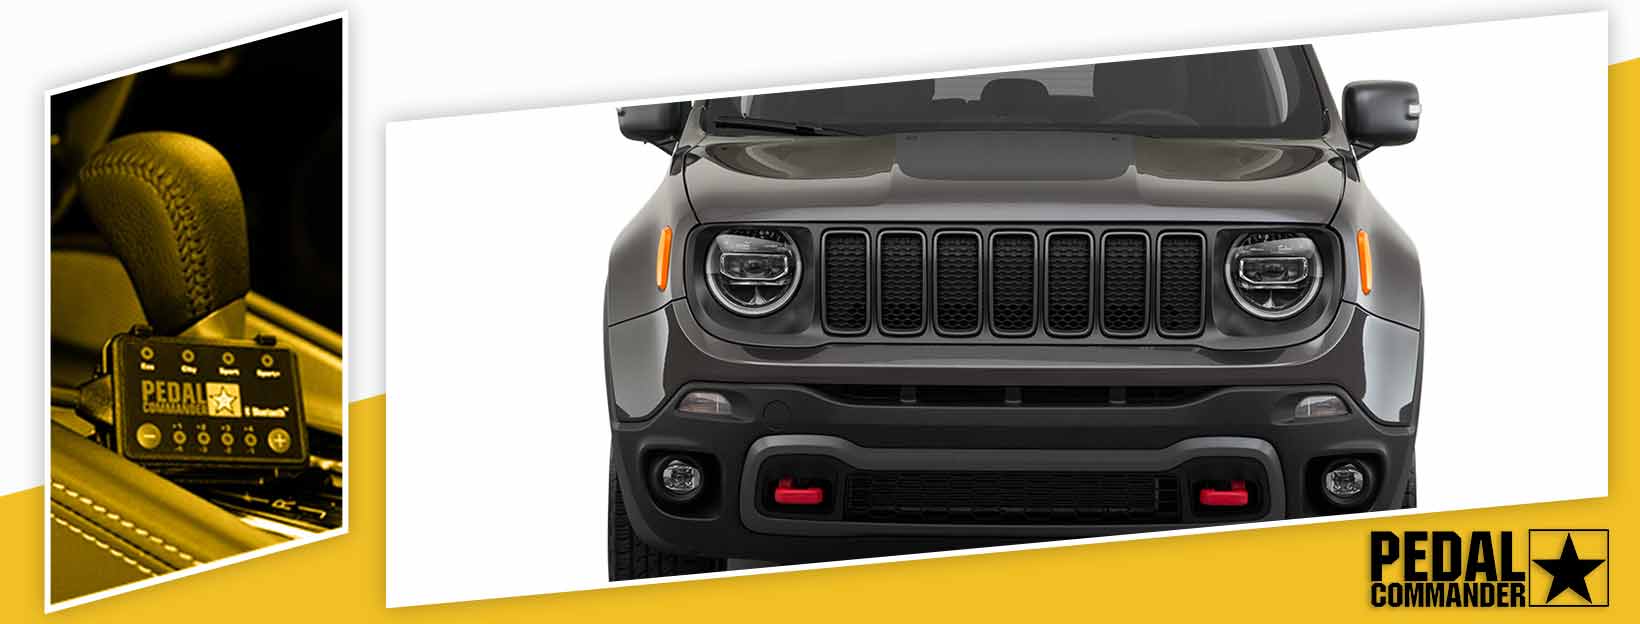 Pedal Commander for Jeep Renegade - side